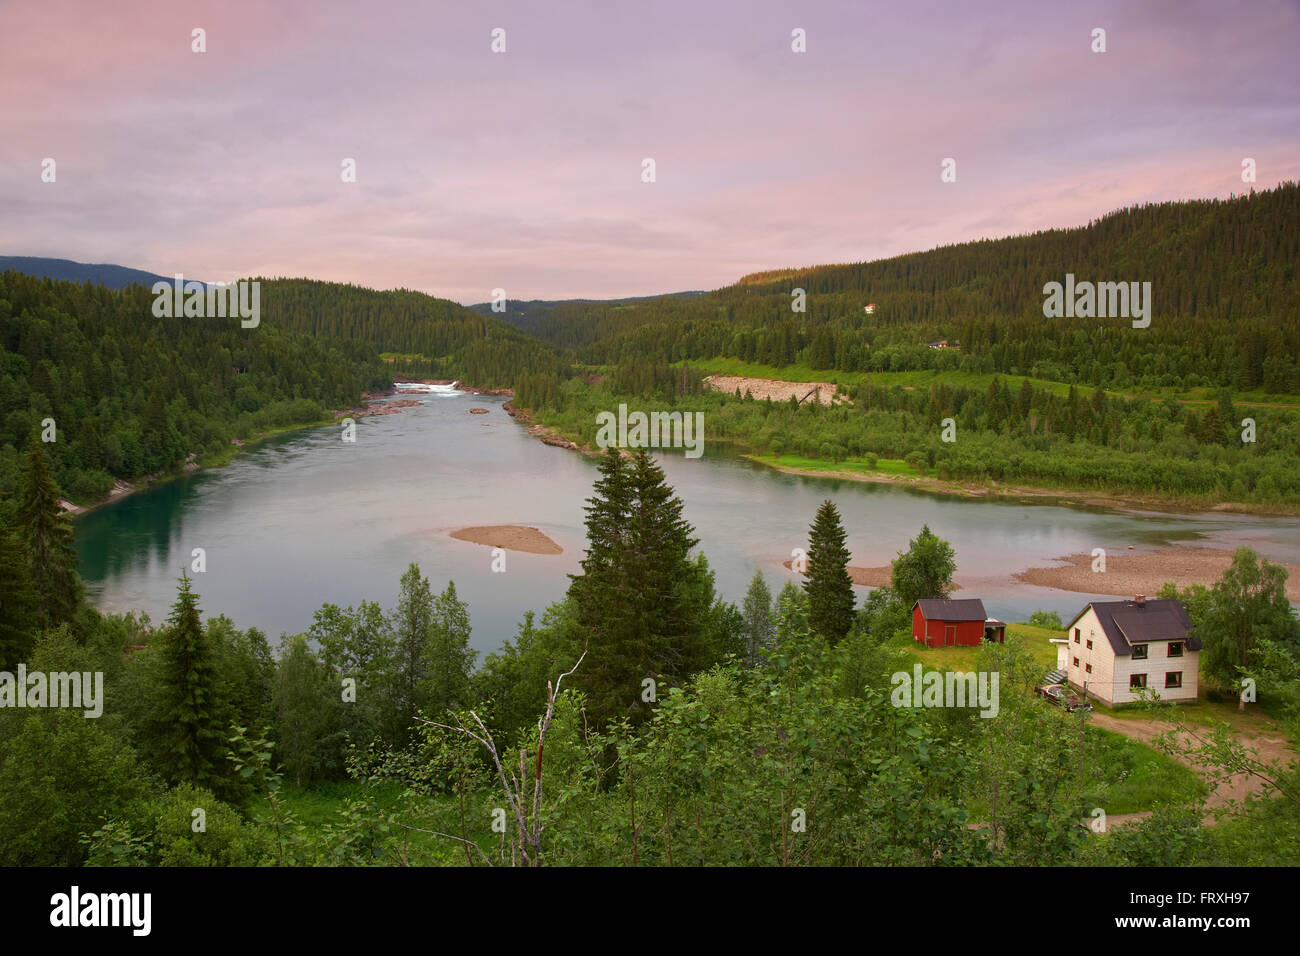 View over forest and houses at the river Ranaelva near Mo i Rana, Province of Nordland, Nordland, Norway, Europe Stock Photo